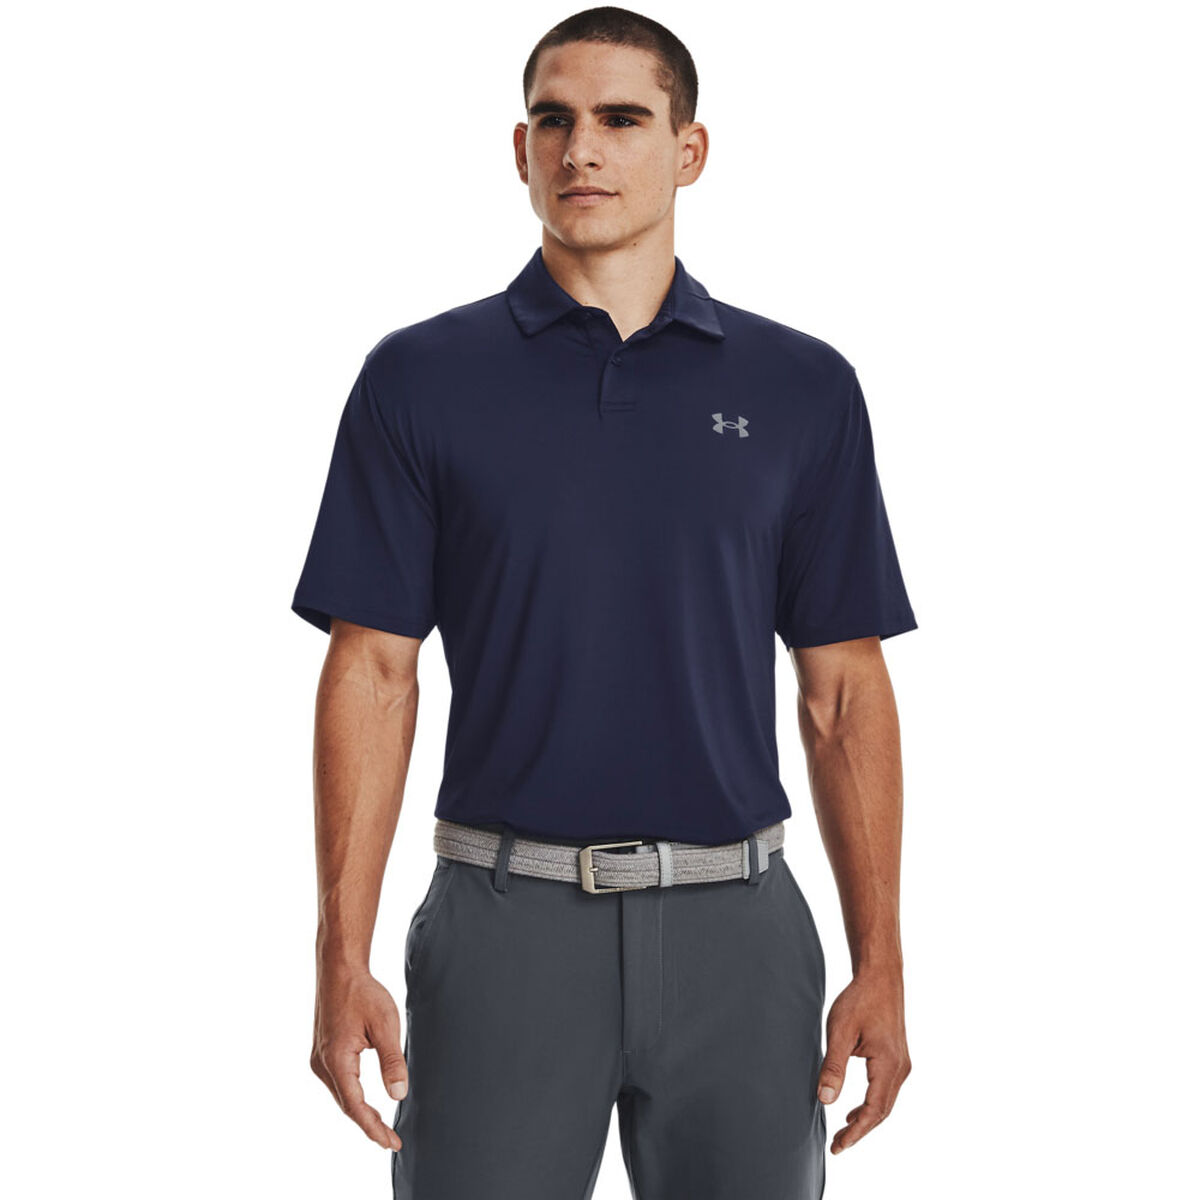 Under Armour Men's Tee to Green Golf Polo Shirt, Mens, Midnight navy/pitch gray, Small | American Golf von Under Armour